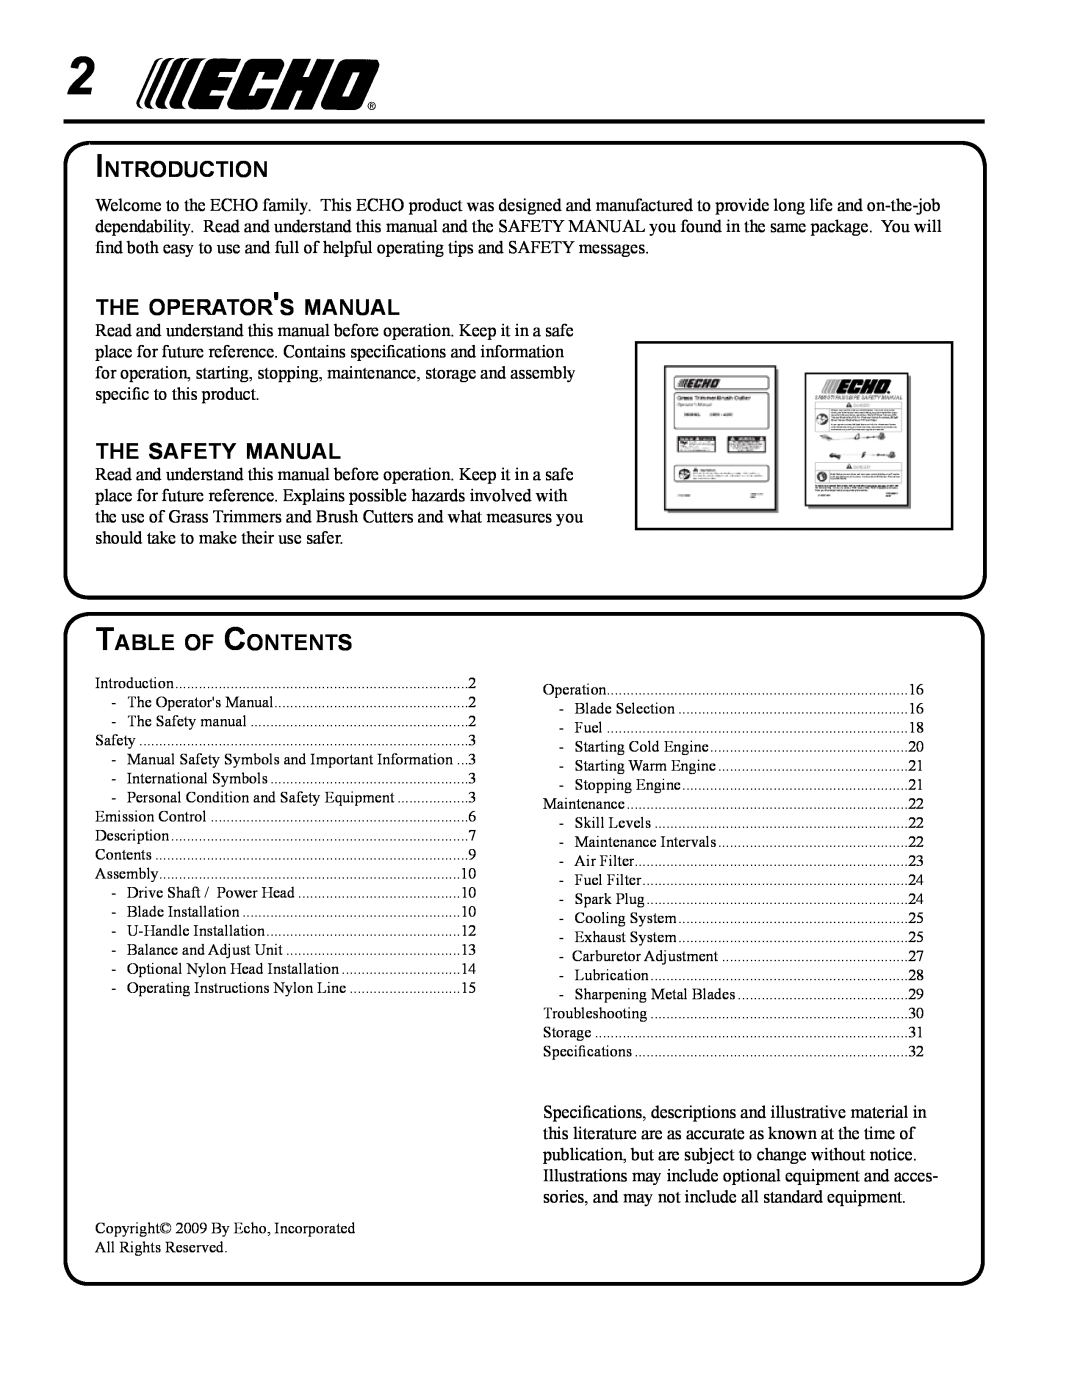 Echo SRM - 410U Introduction, the operators manual, the safety manual, Table of Contents 